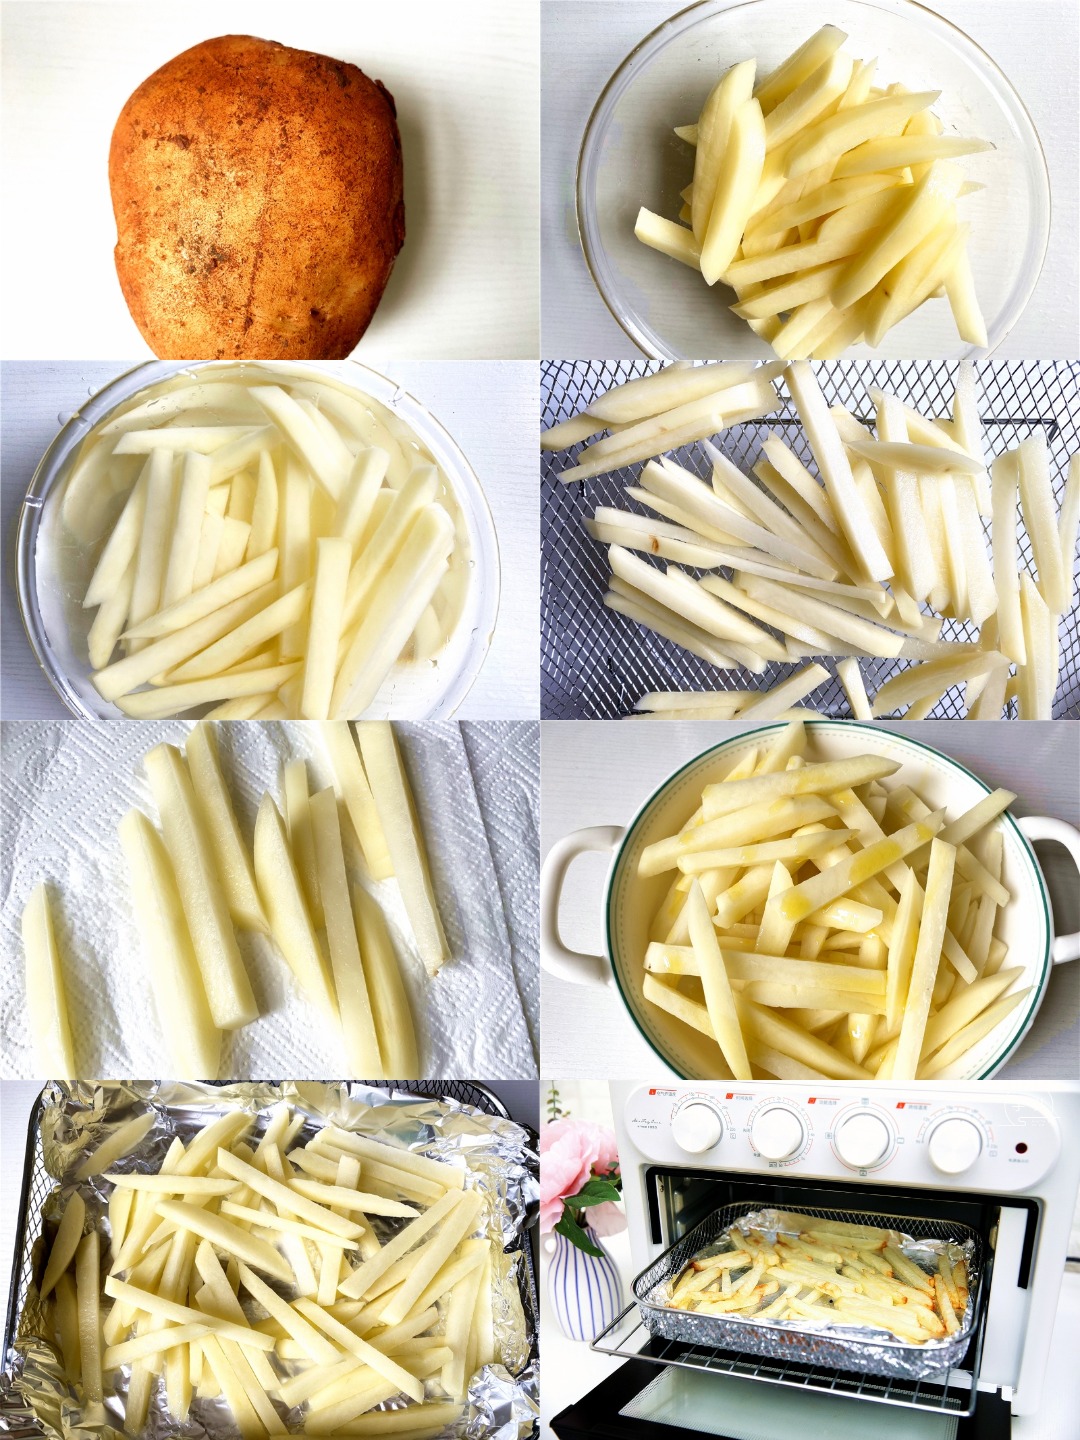 Simple Baked French Fries Steps